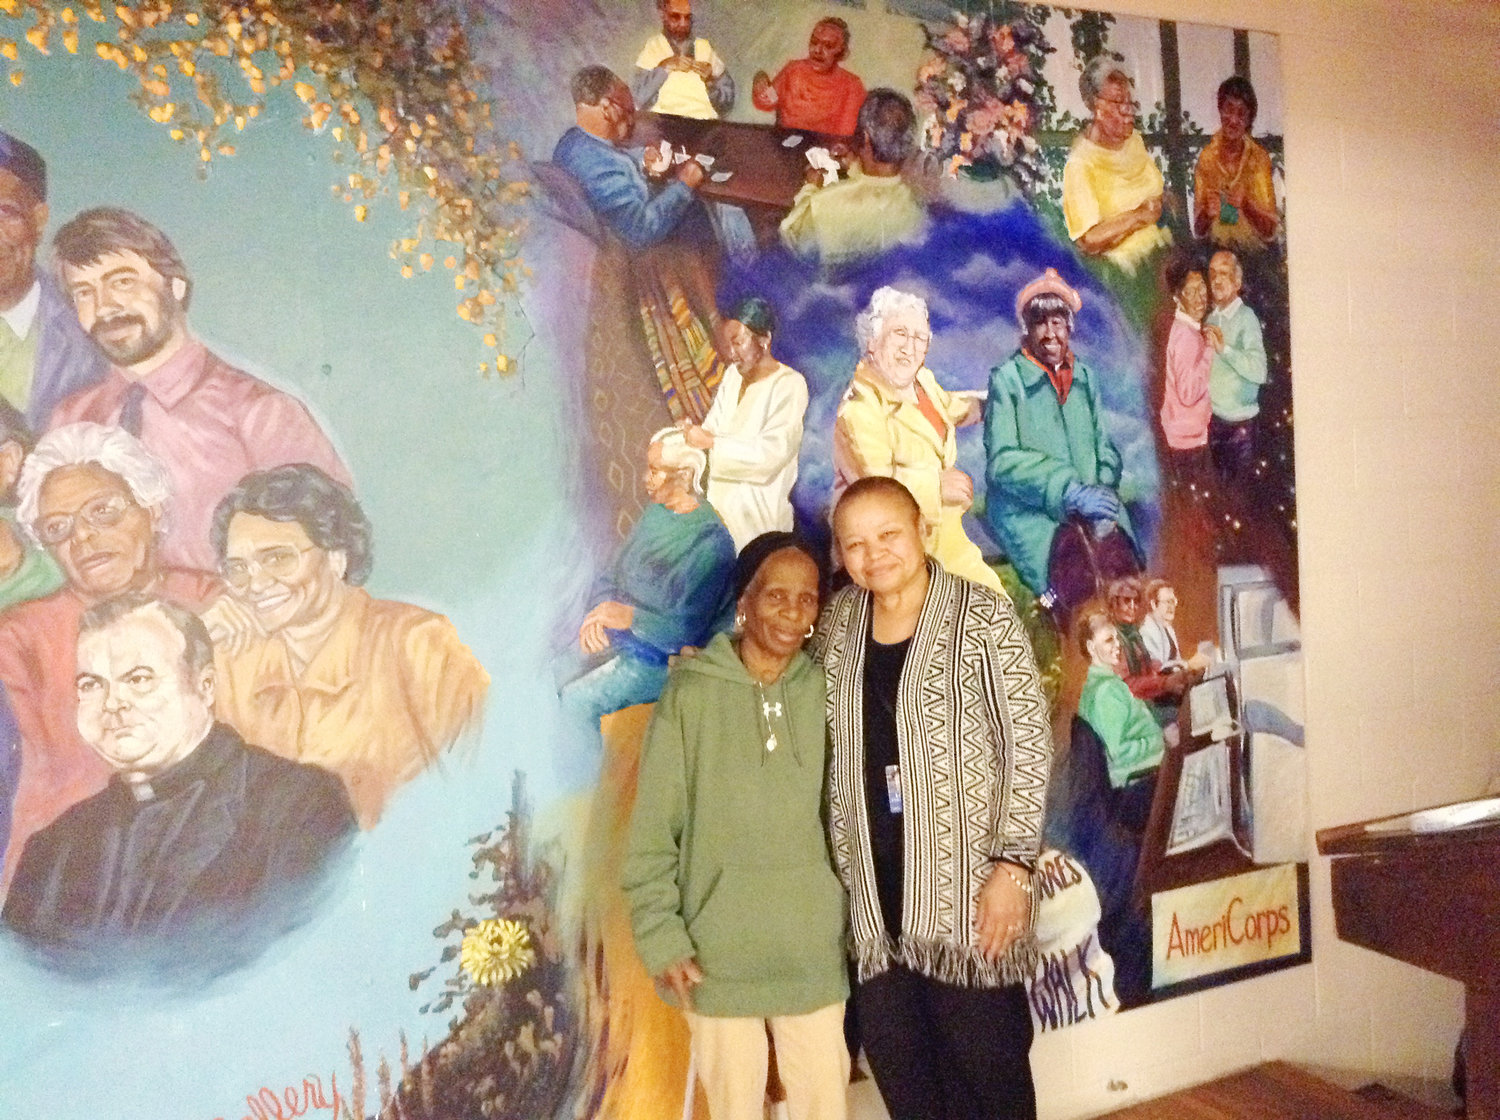 Lorraine DeCosta and Linda A’vant-Deishinni, director of the St. Martin de Porres Center, stand before a mural in the center’s dining hall. DeCosta, a stroke survivor, is one of many members of the St. Martin’s community to be depicted in the mural.